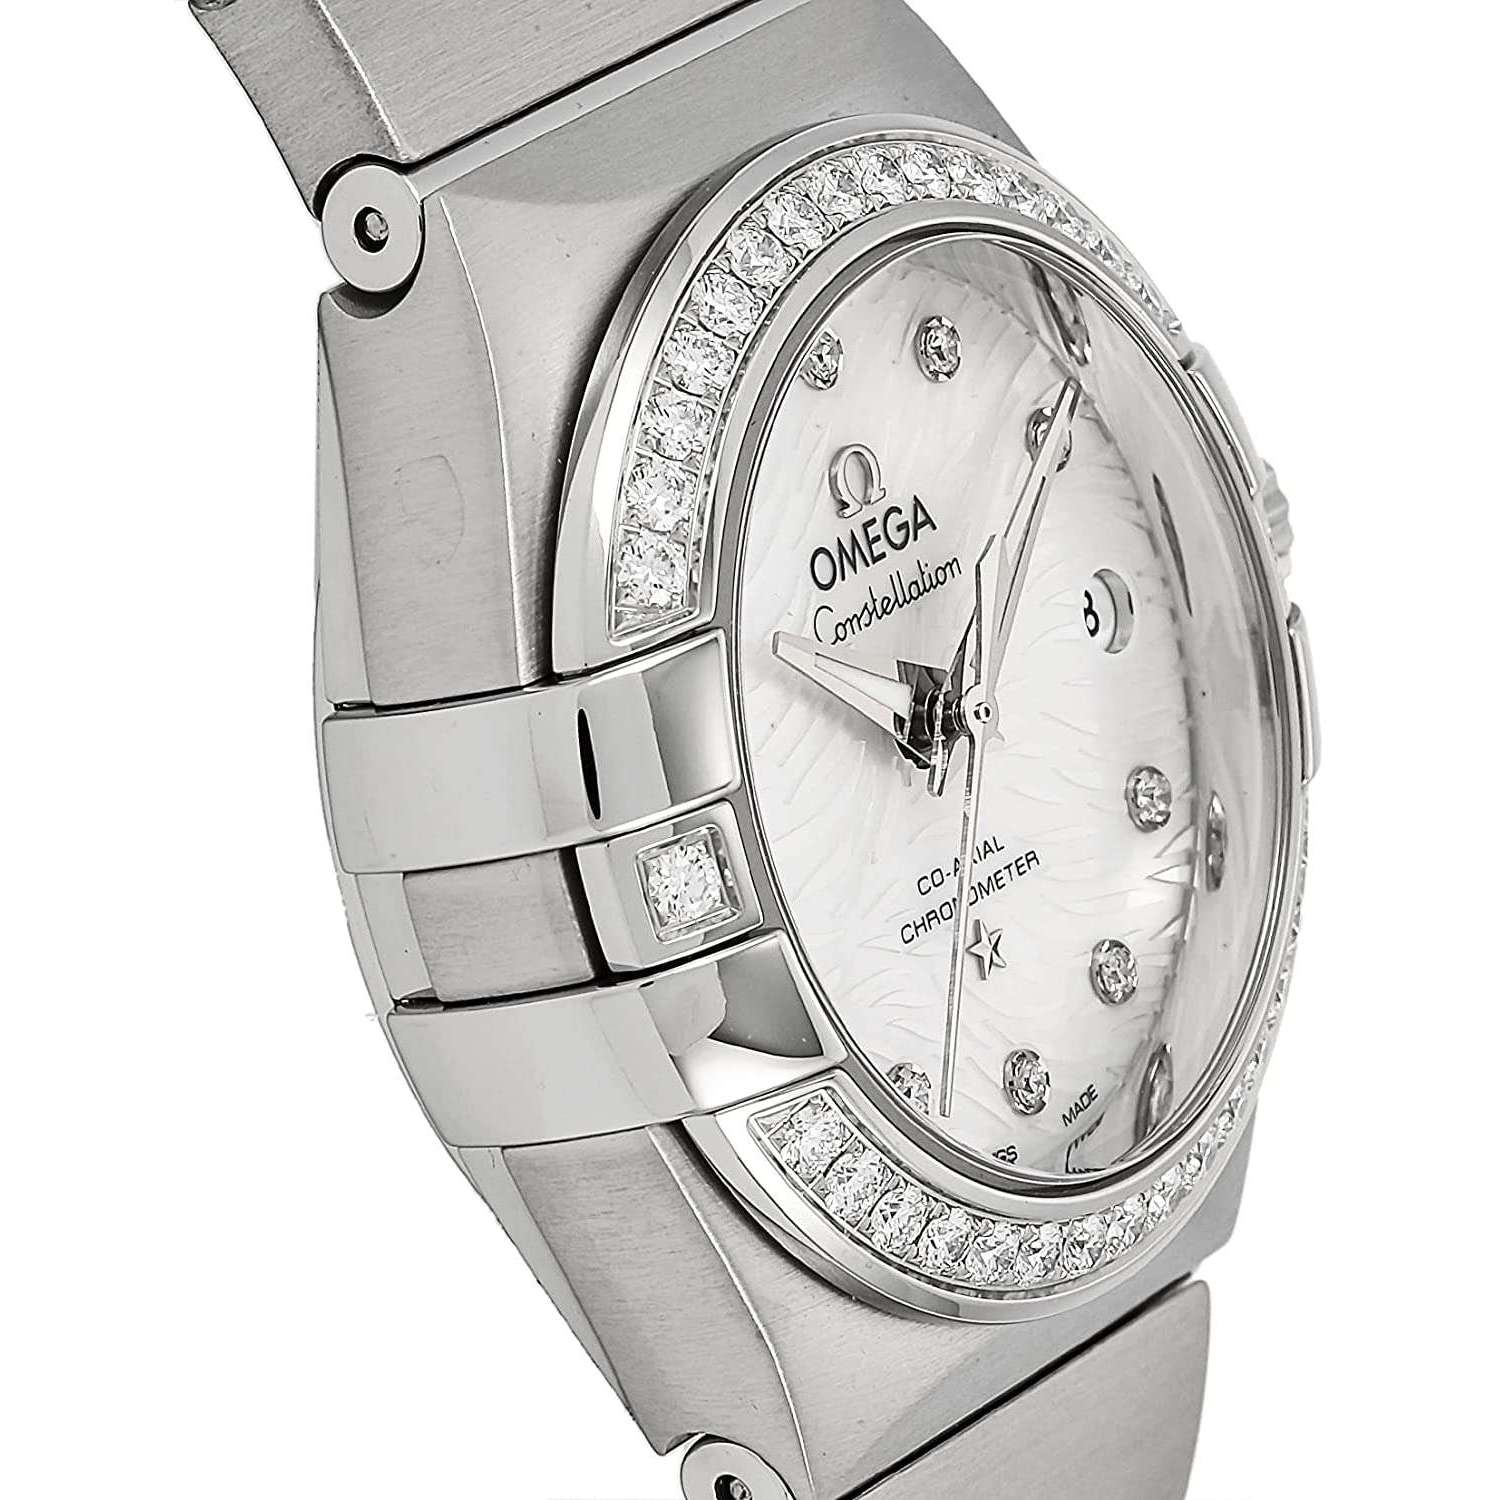 ROOK JAPAN:OMEGA CONSTELLATION CO-AXIAL CHRONOMETER 27 MM WOMEN WATCH 123.15.27.20.55.003,Luxury Watch,Omega